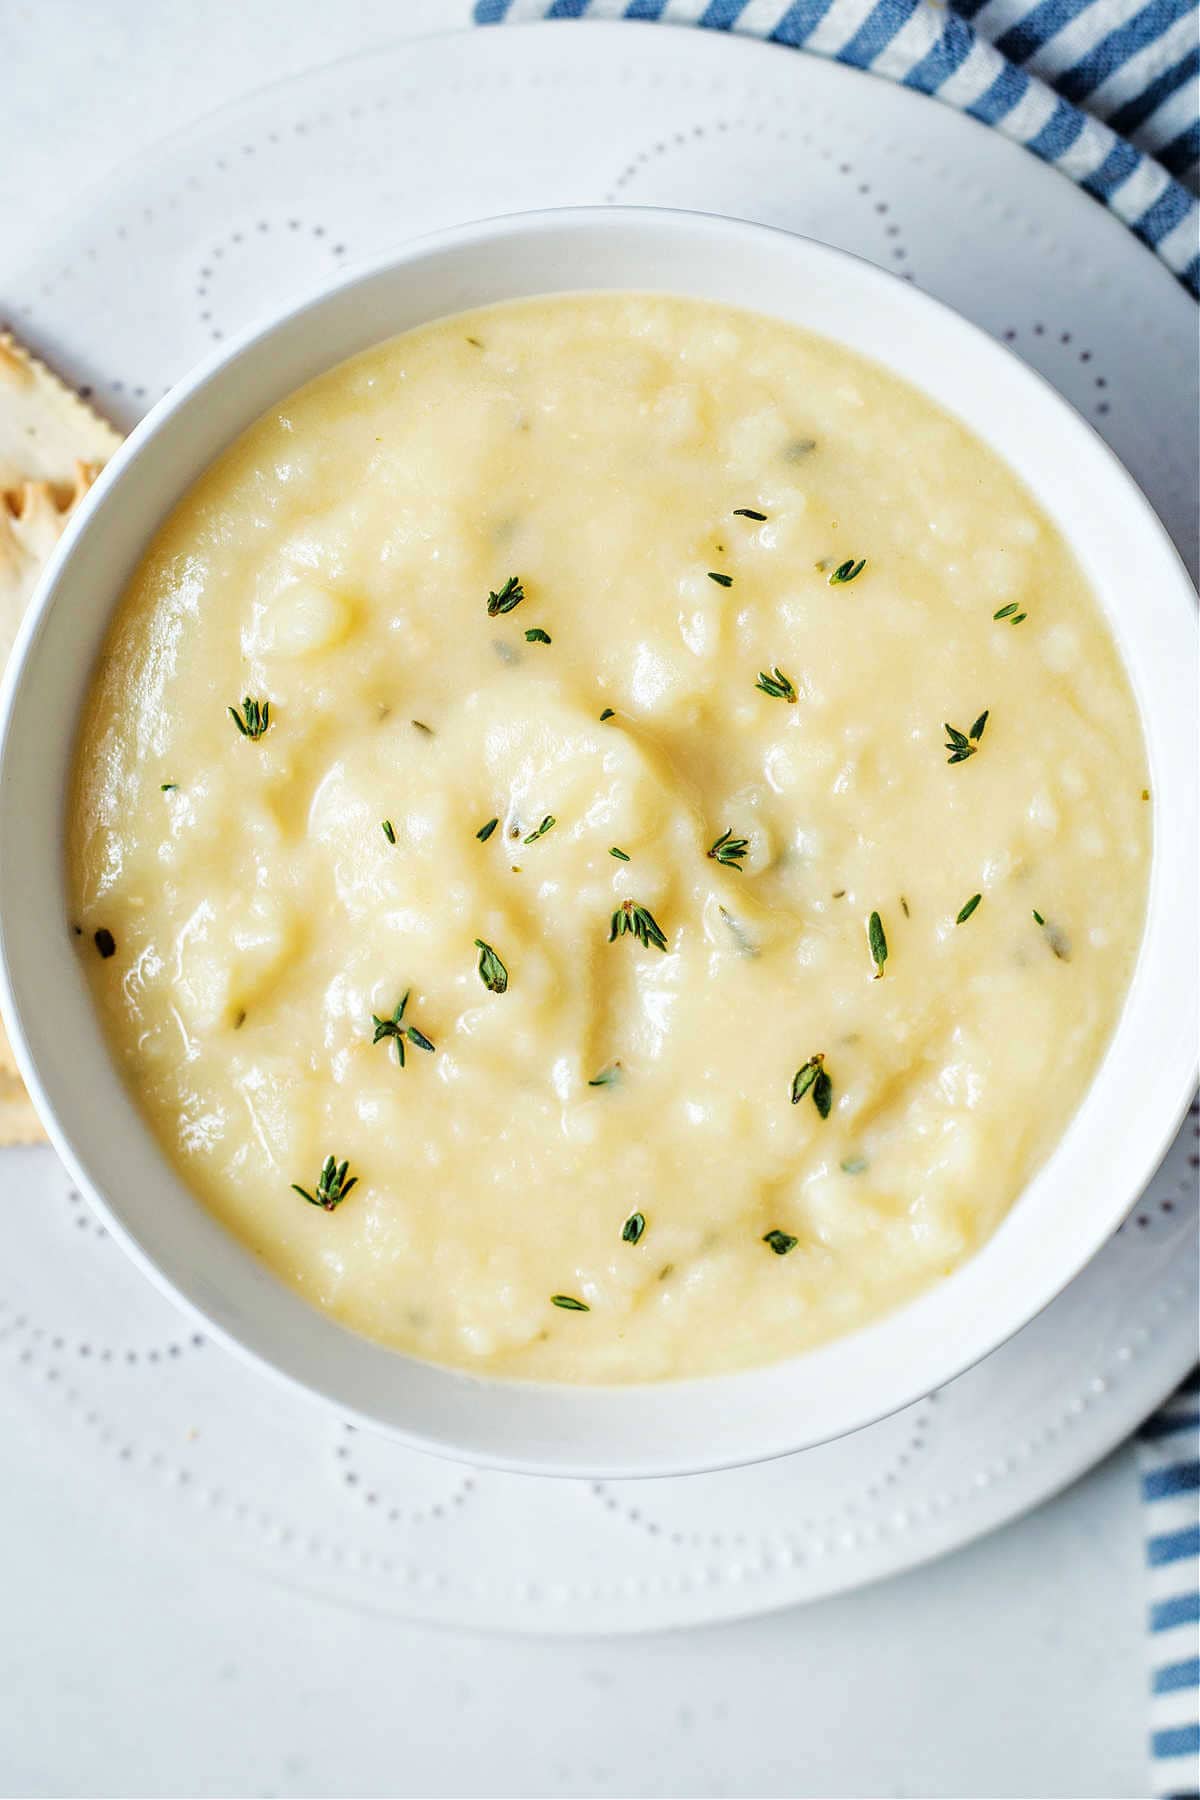 A bowl of creamy potato soup with herb garnish